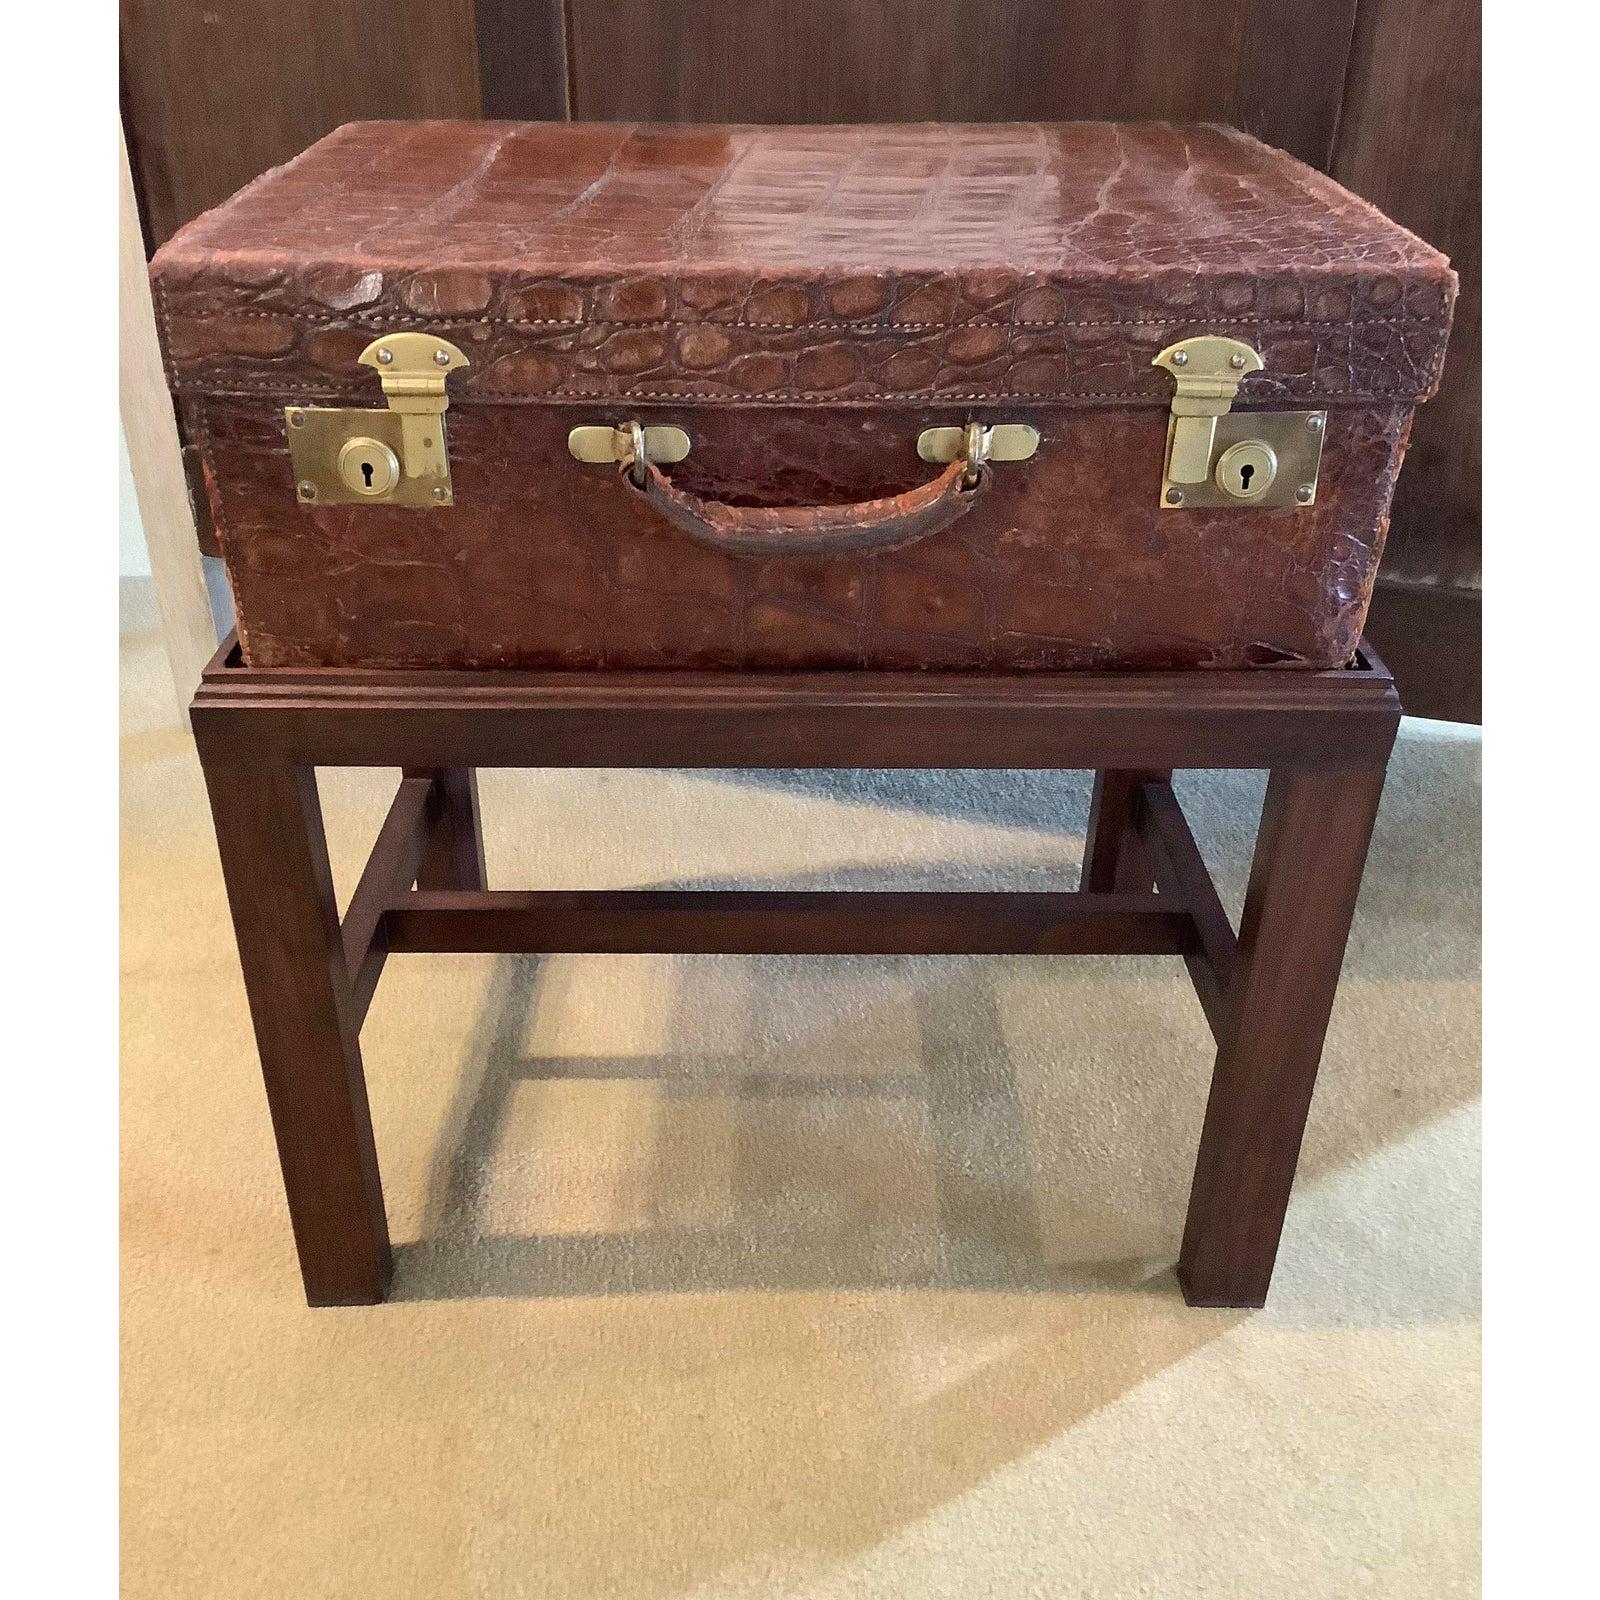 Fantastic alligator suitcase with vintage custom stand by Barkers of Kensington, London.
Barkers of Kensington is a prestigious retailer in London.
This beautiful alligator suitcase is in nice shape with a more lining.
The case sits on a vintage